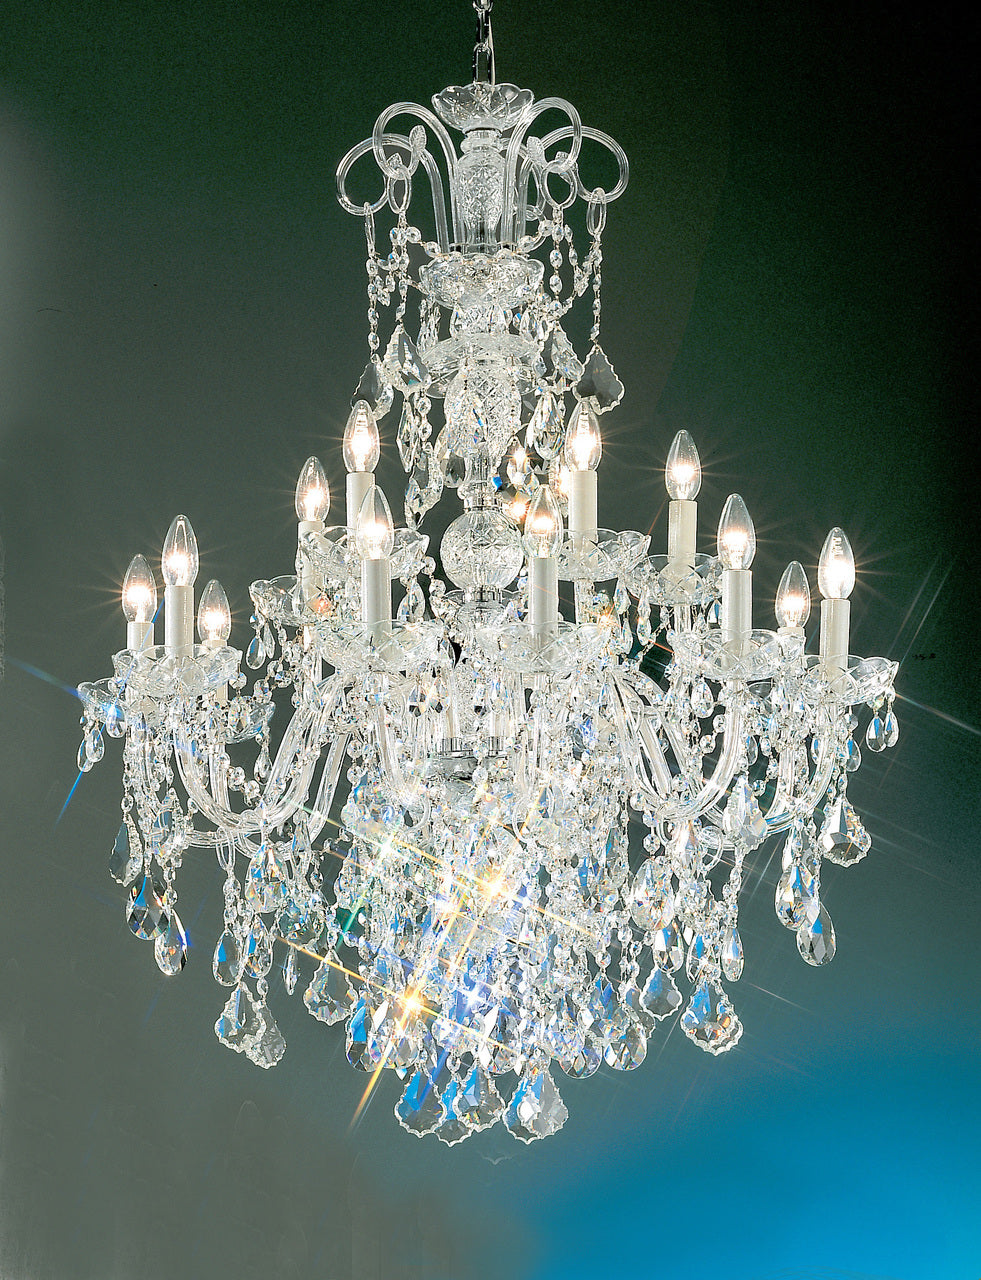 Classic Lighting 8262 CH S Bohemia Crystal/Glass Chandelier in Chrome (Imported from Italy)